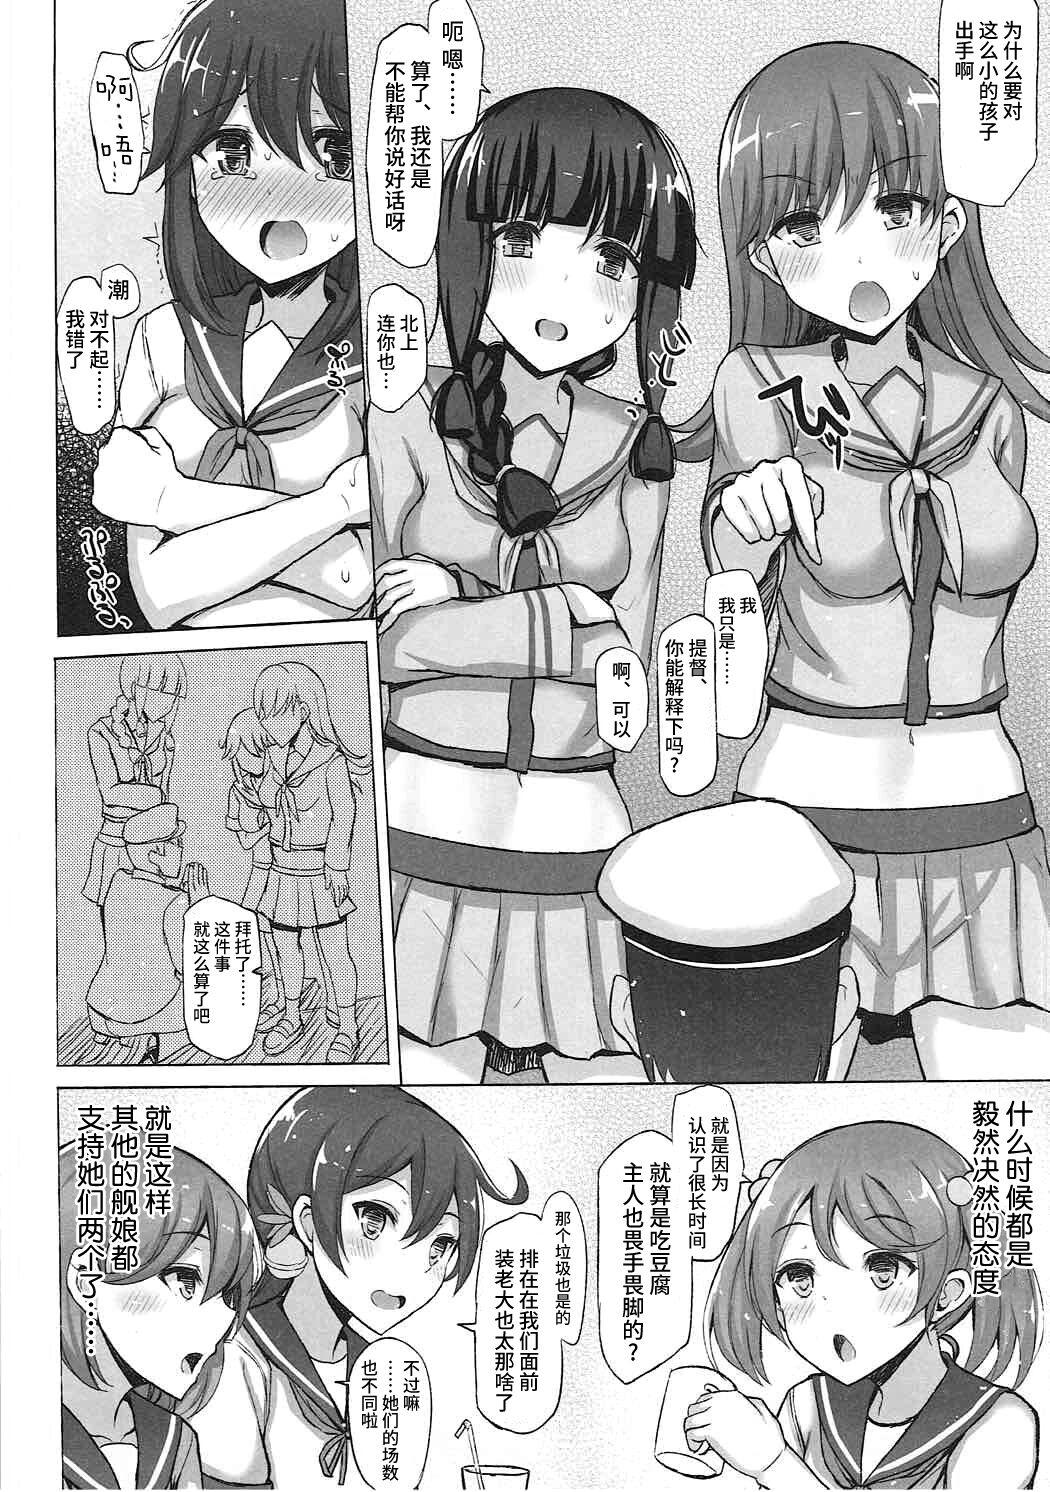 Femdom AS YOU ARE. - Kantai collection Group - Page 3